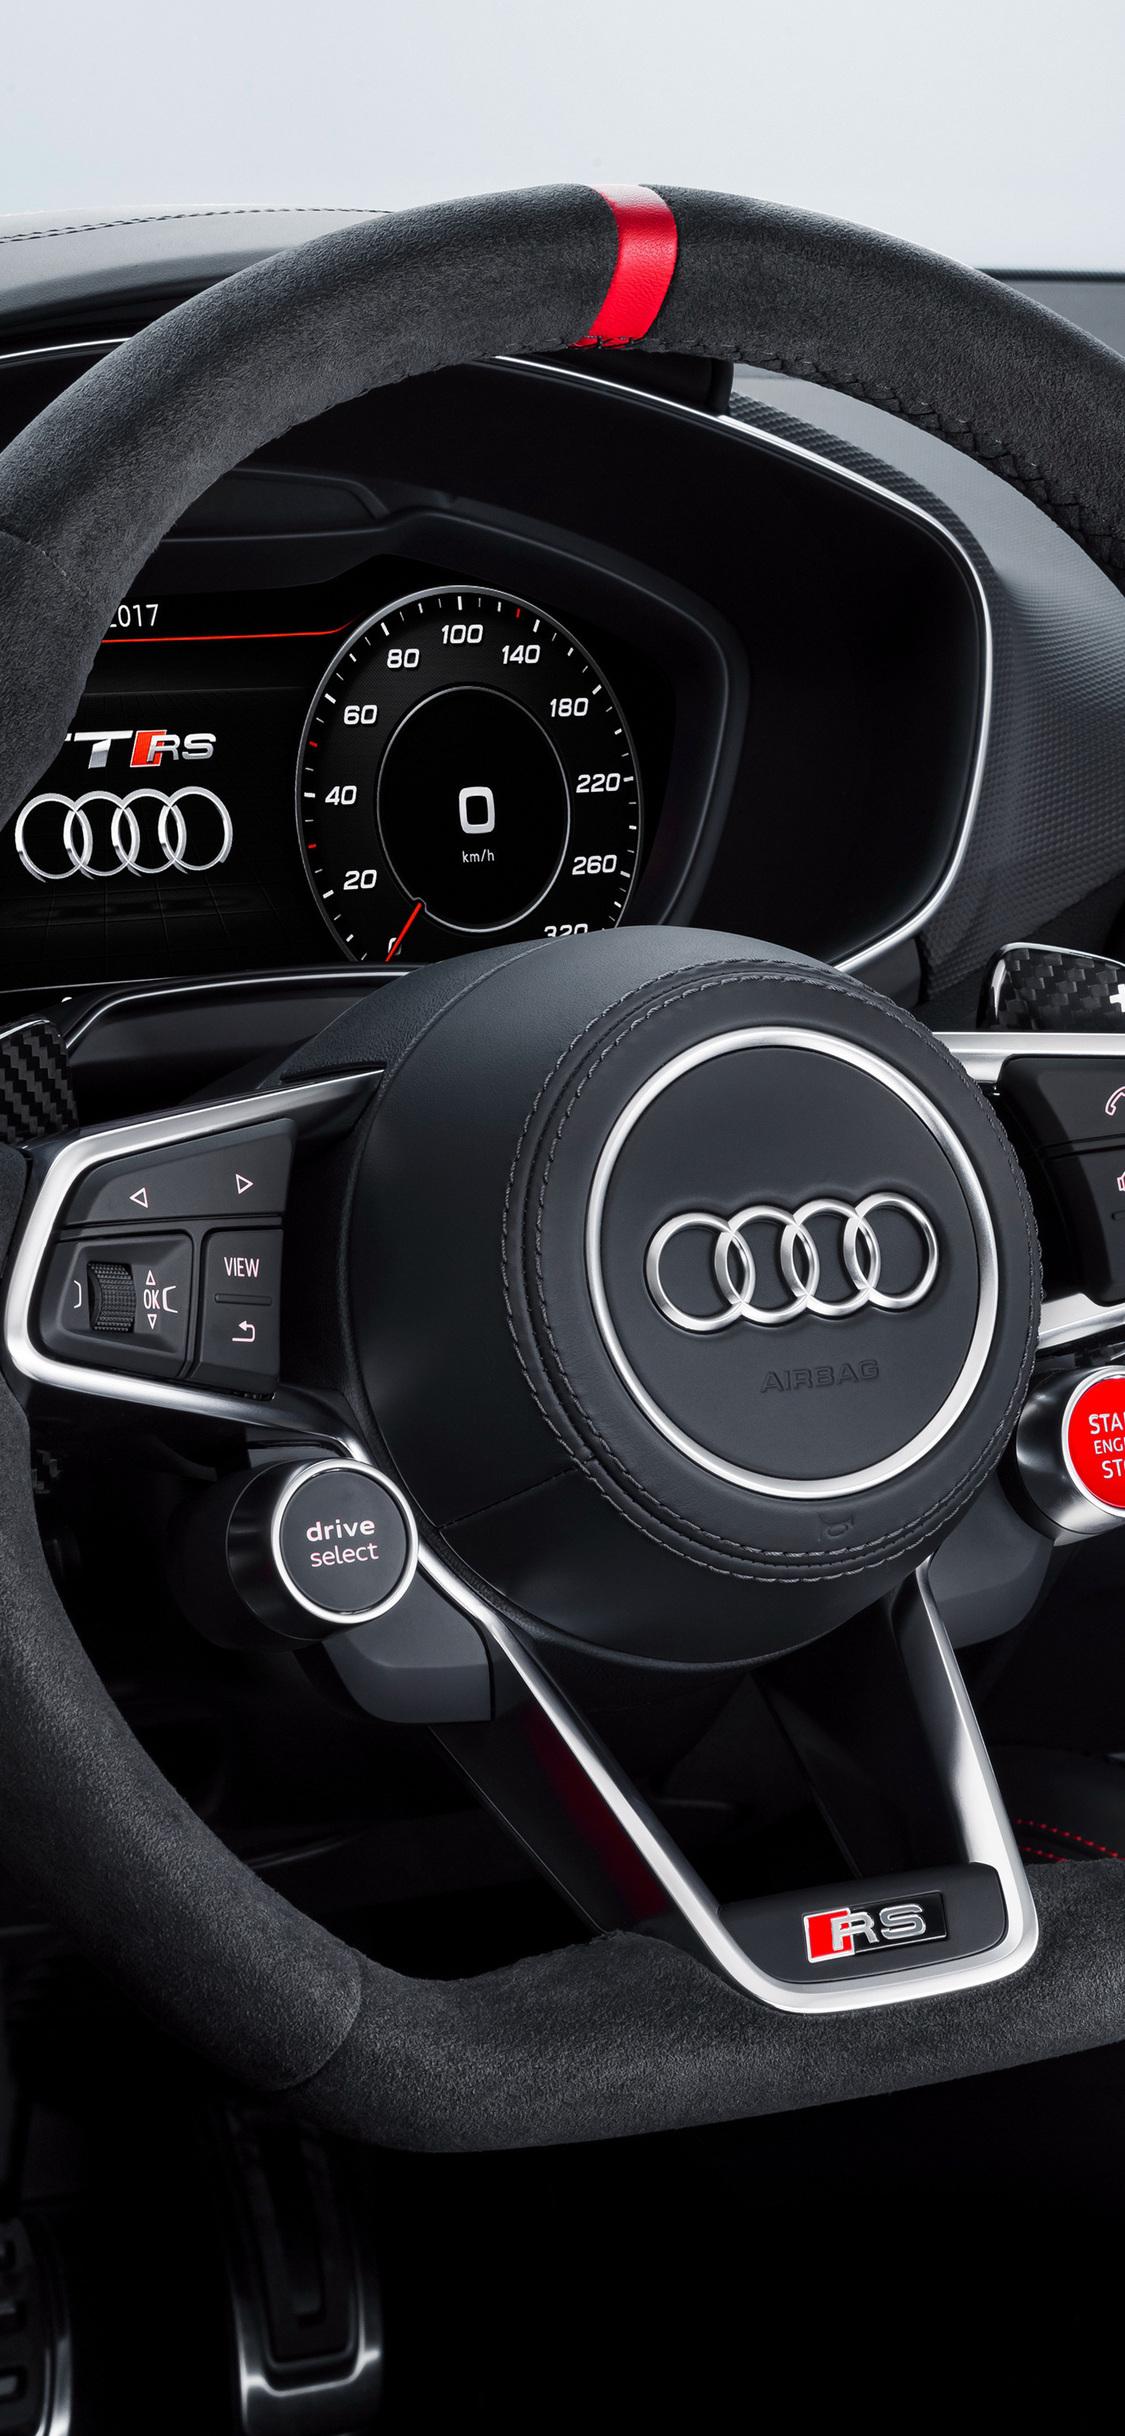 Audi Car Wallpapers For Iphone